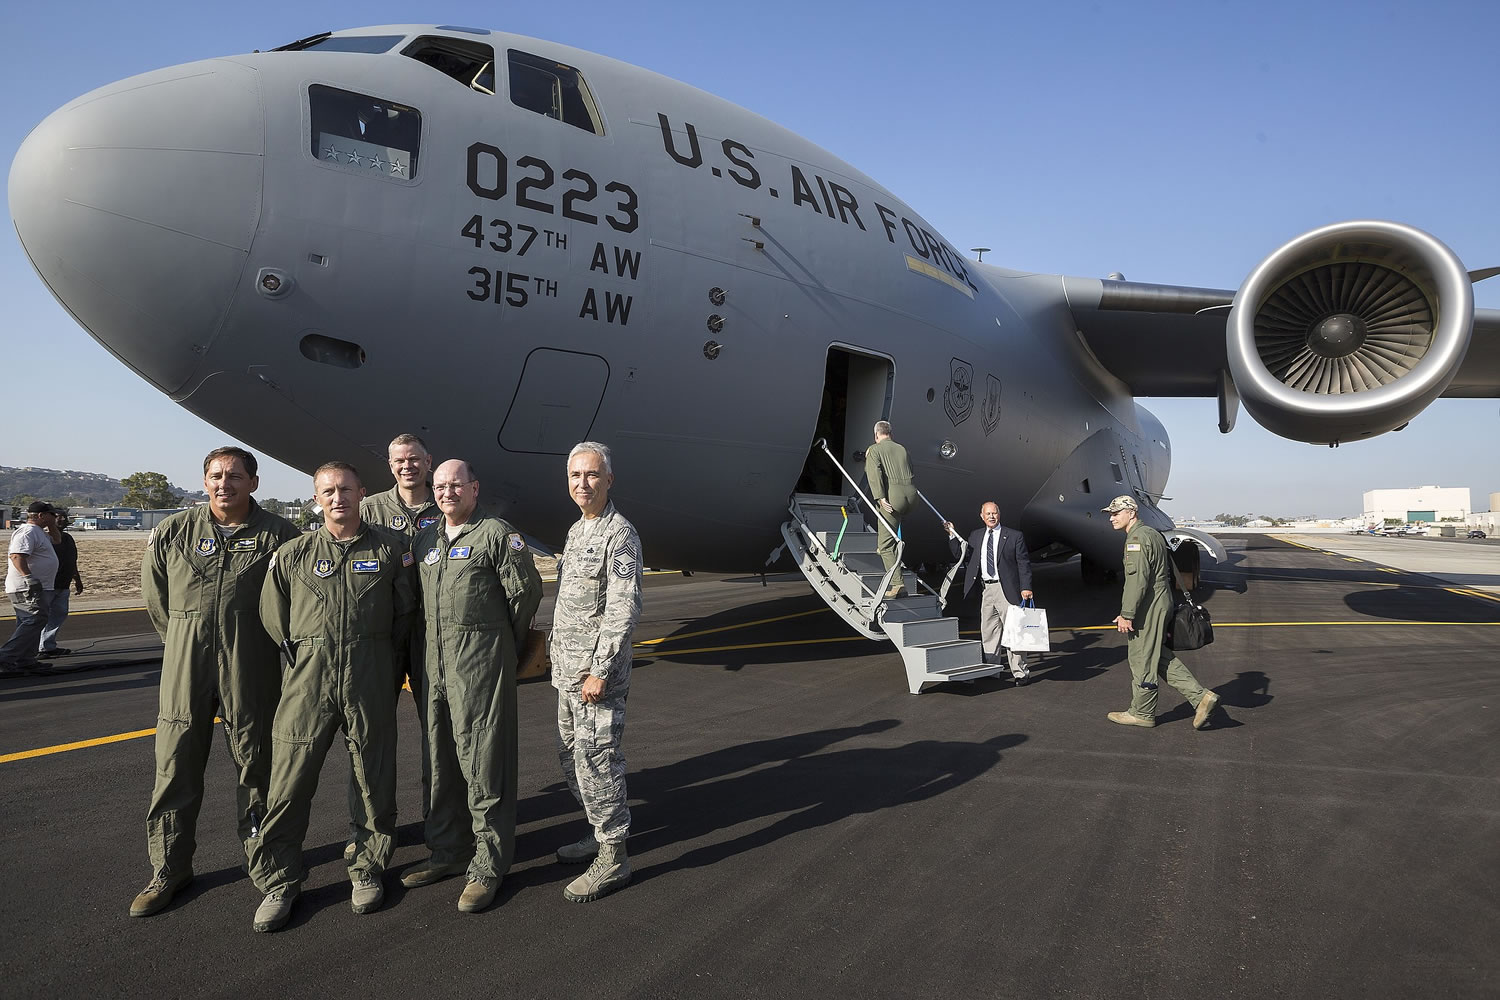 Boeing Co. delivers the last C-17 Globemaster III cargo jet for the U.S. Air Force at the aerospace company's plant to members of the U.S. Air Force in Long Beach, Calif., on Thursday.